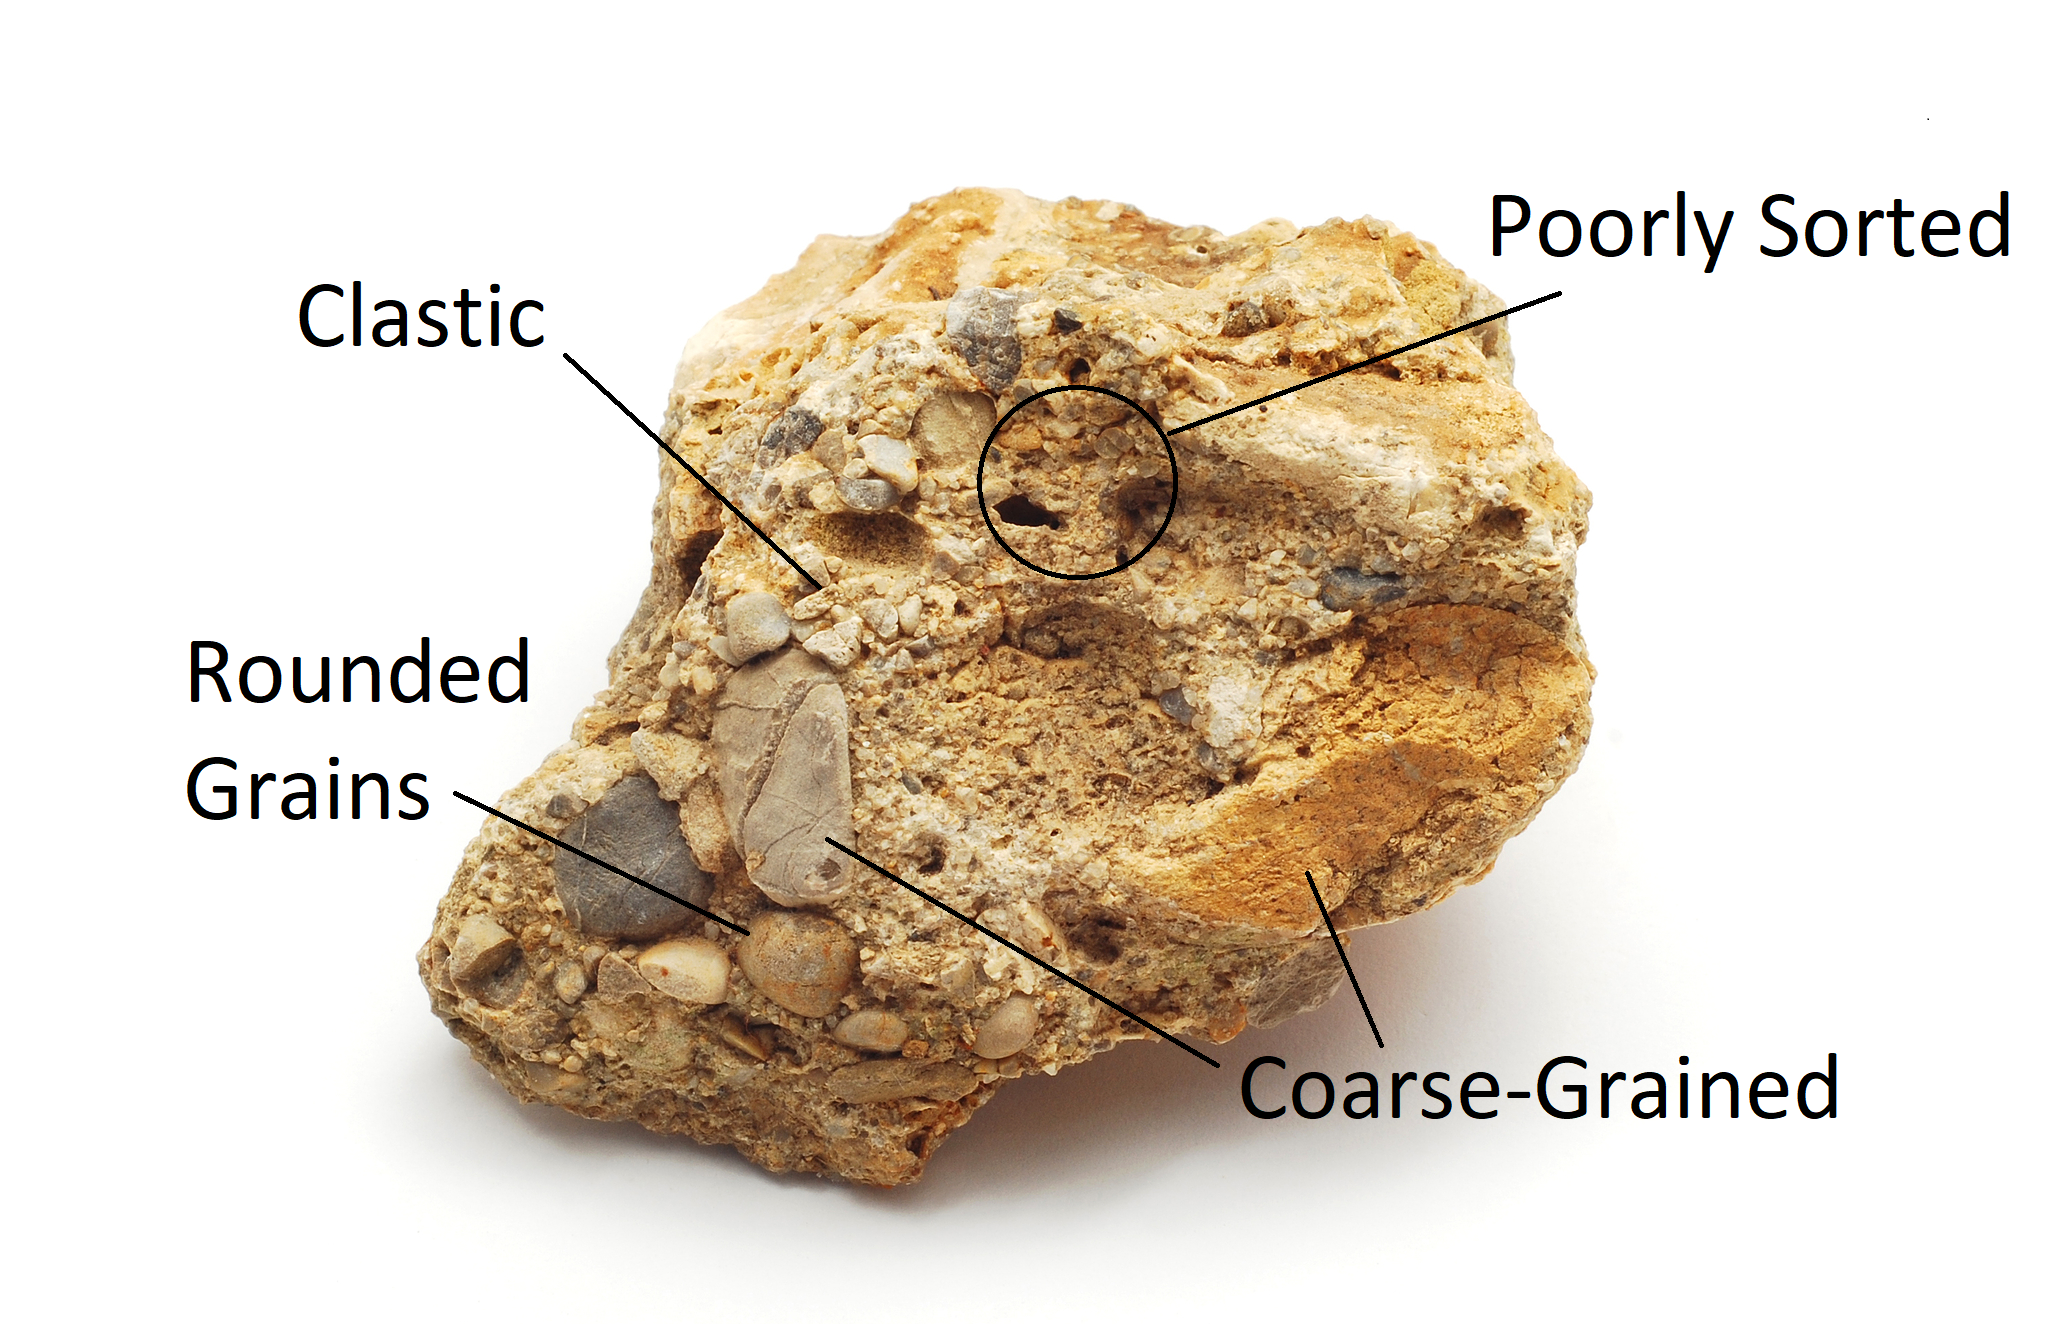 Conglomerate with annotations showing its characteristics